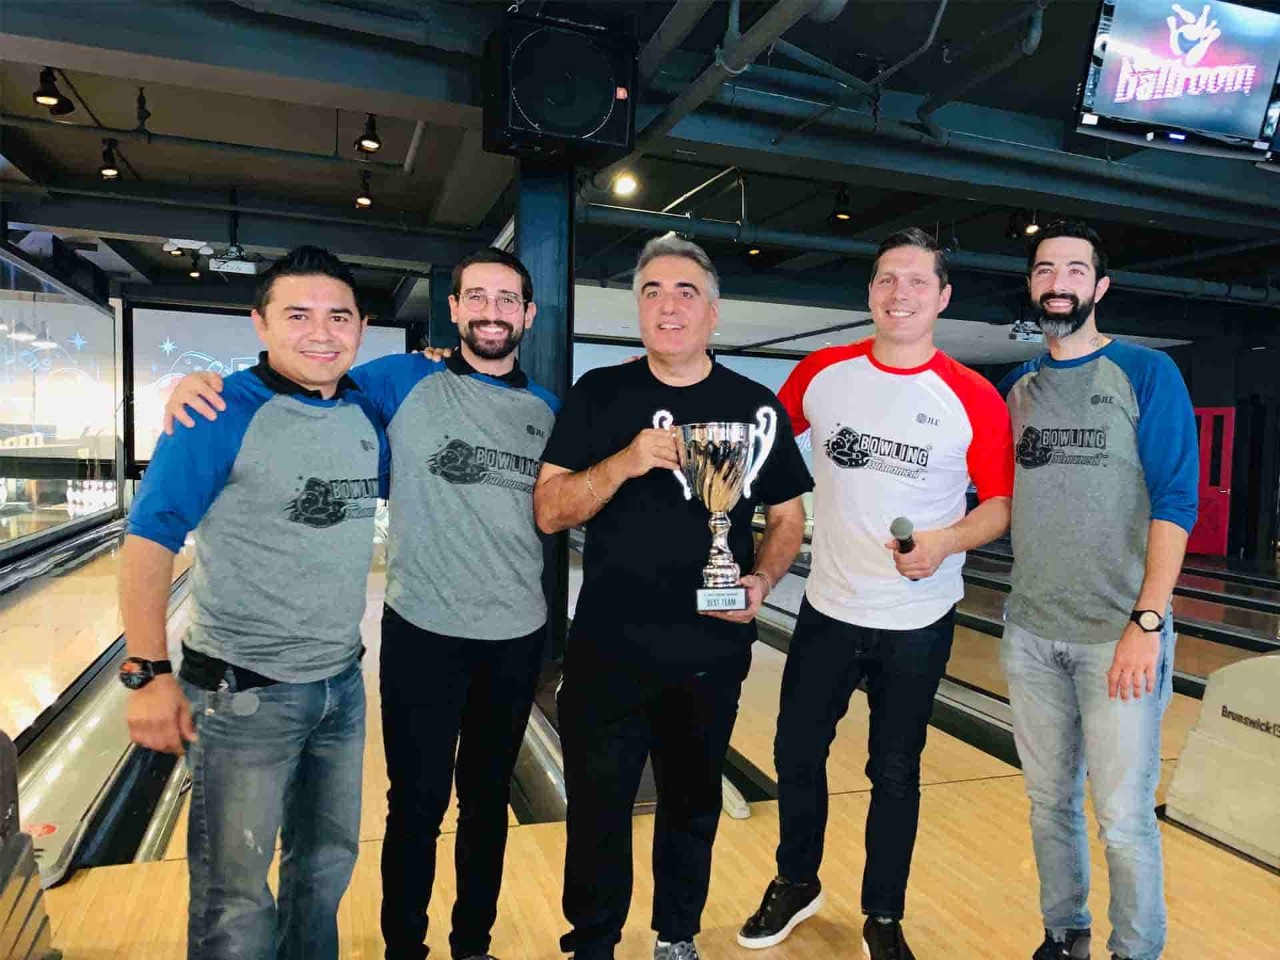 Winning champions with trophy in bowling game